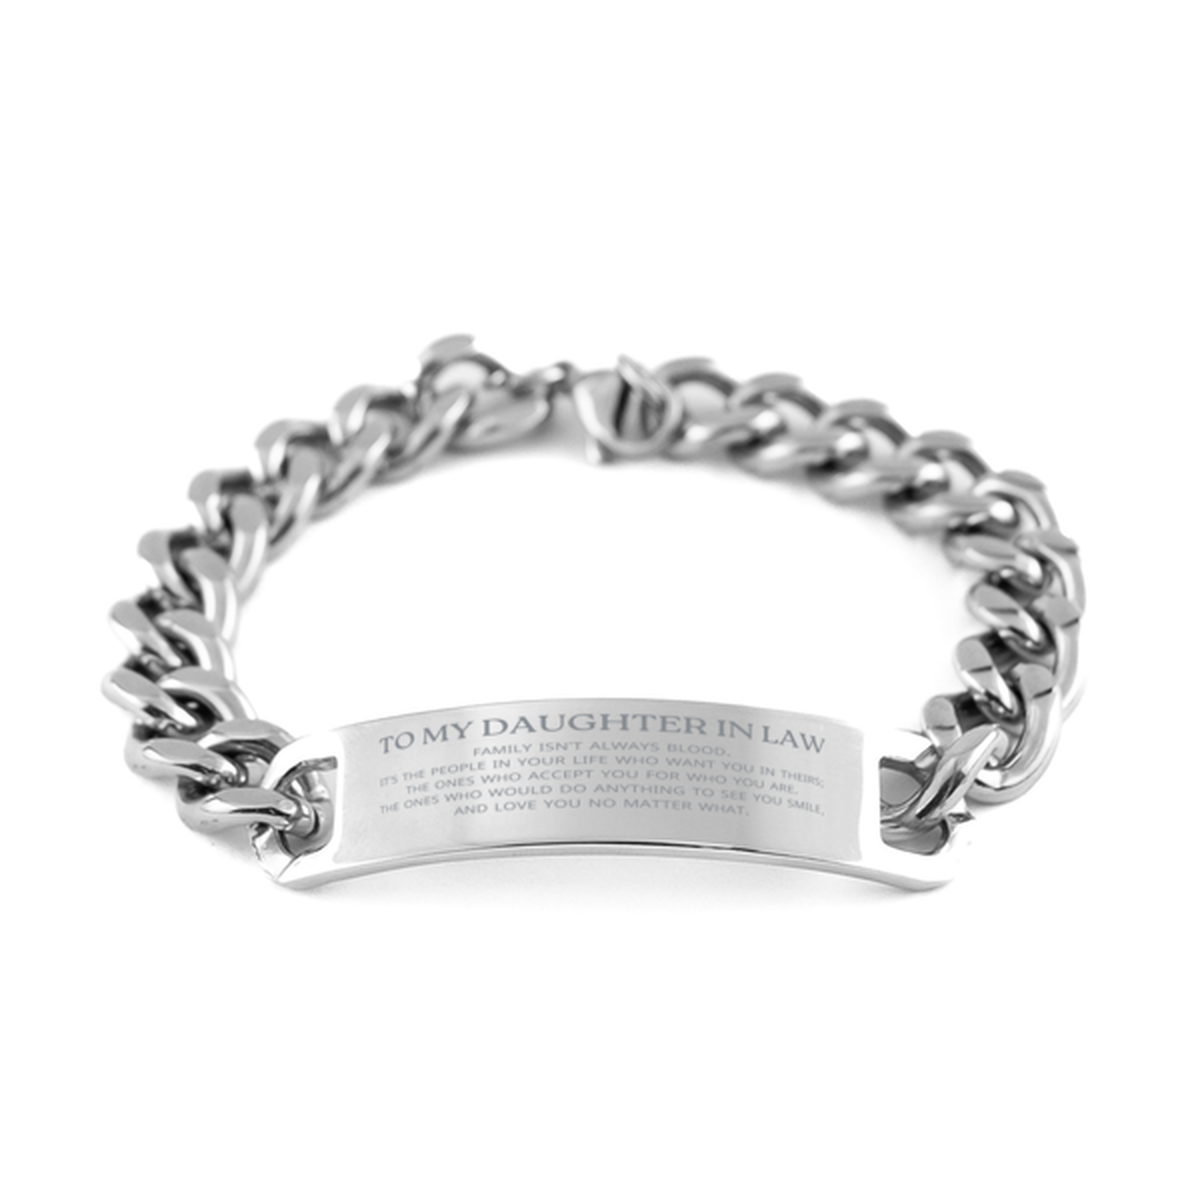 To My Daughter In Law Gifts, Family isn't always blood, Daughter In Law Cuban Chain Stainless Steel Bracelet, Birthday Christmas Unique Present For Daughter In Law